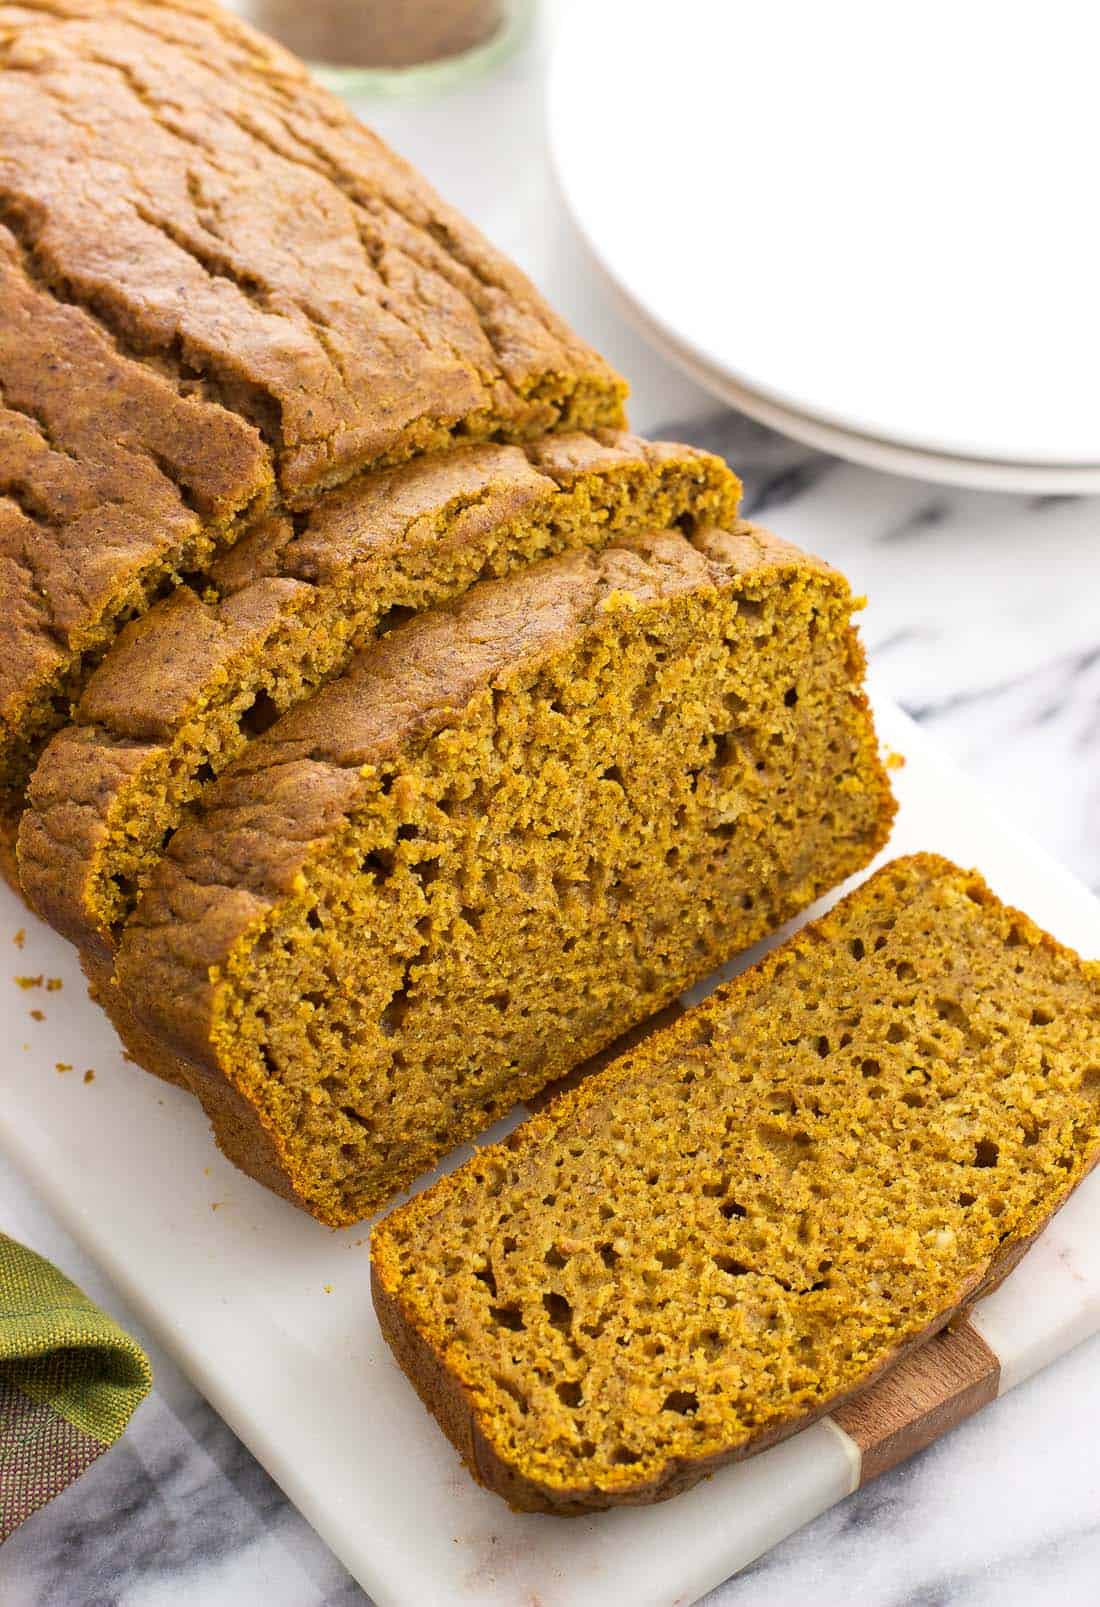 A loaf of half-sliced pumpkin bread on a serving tray.